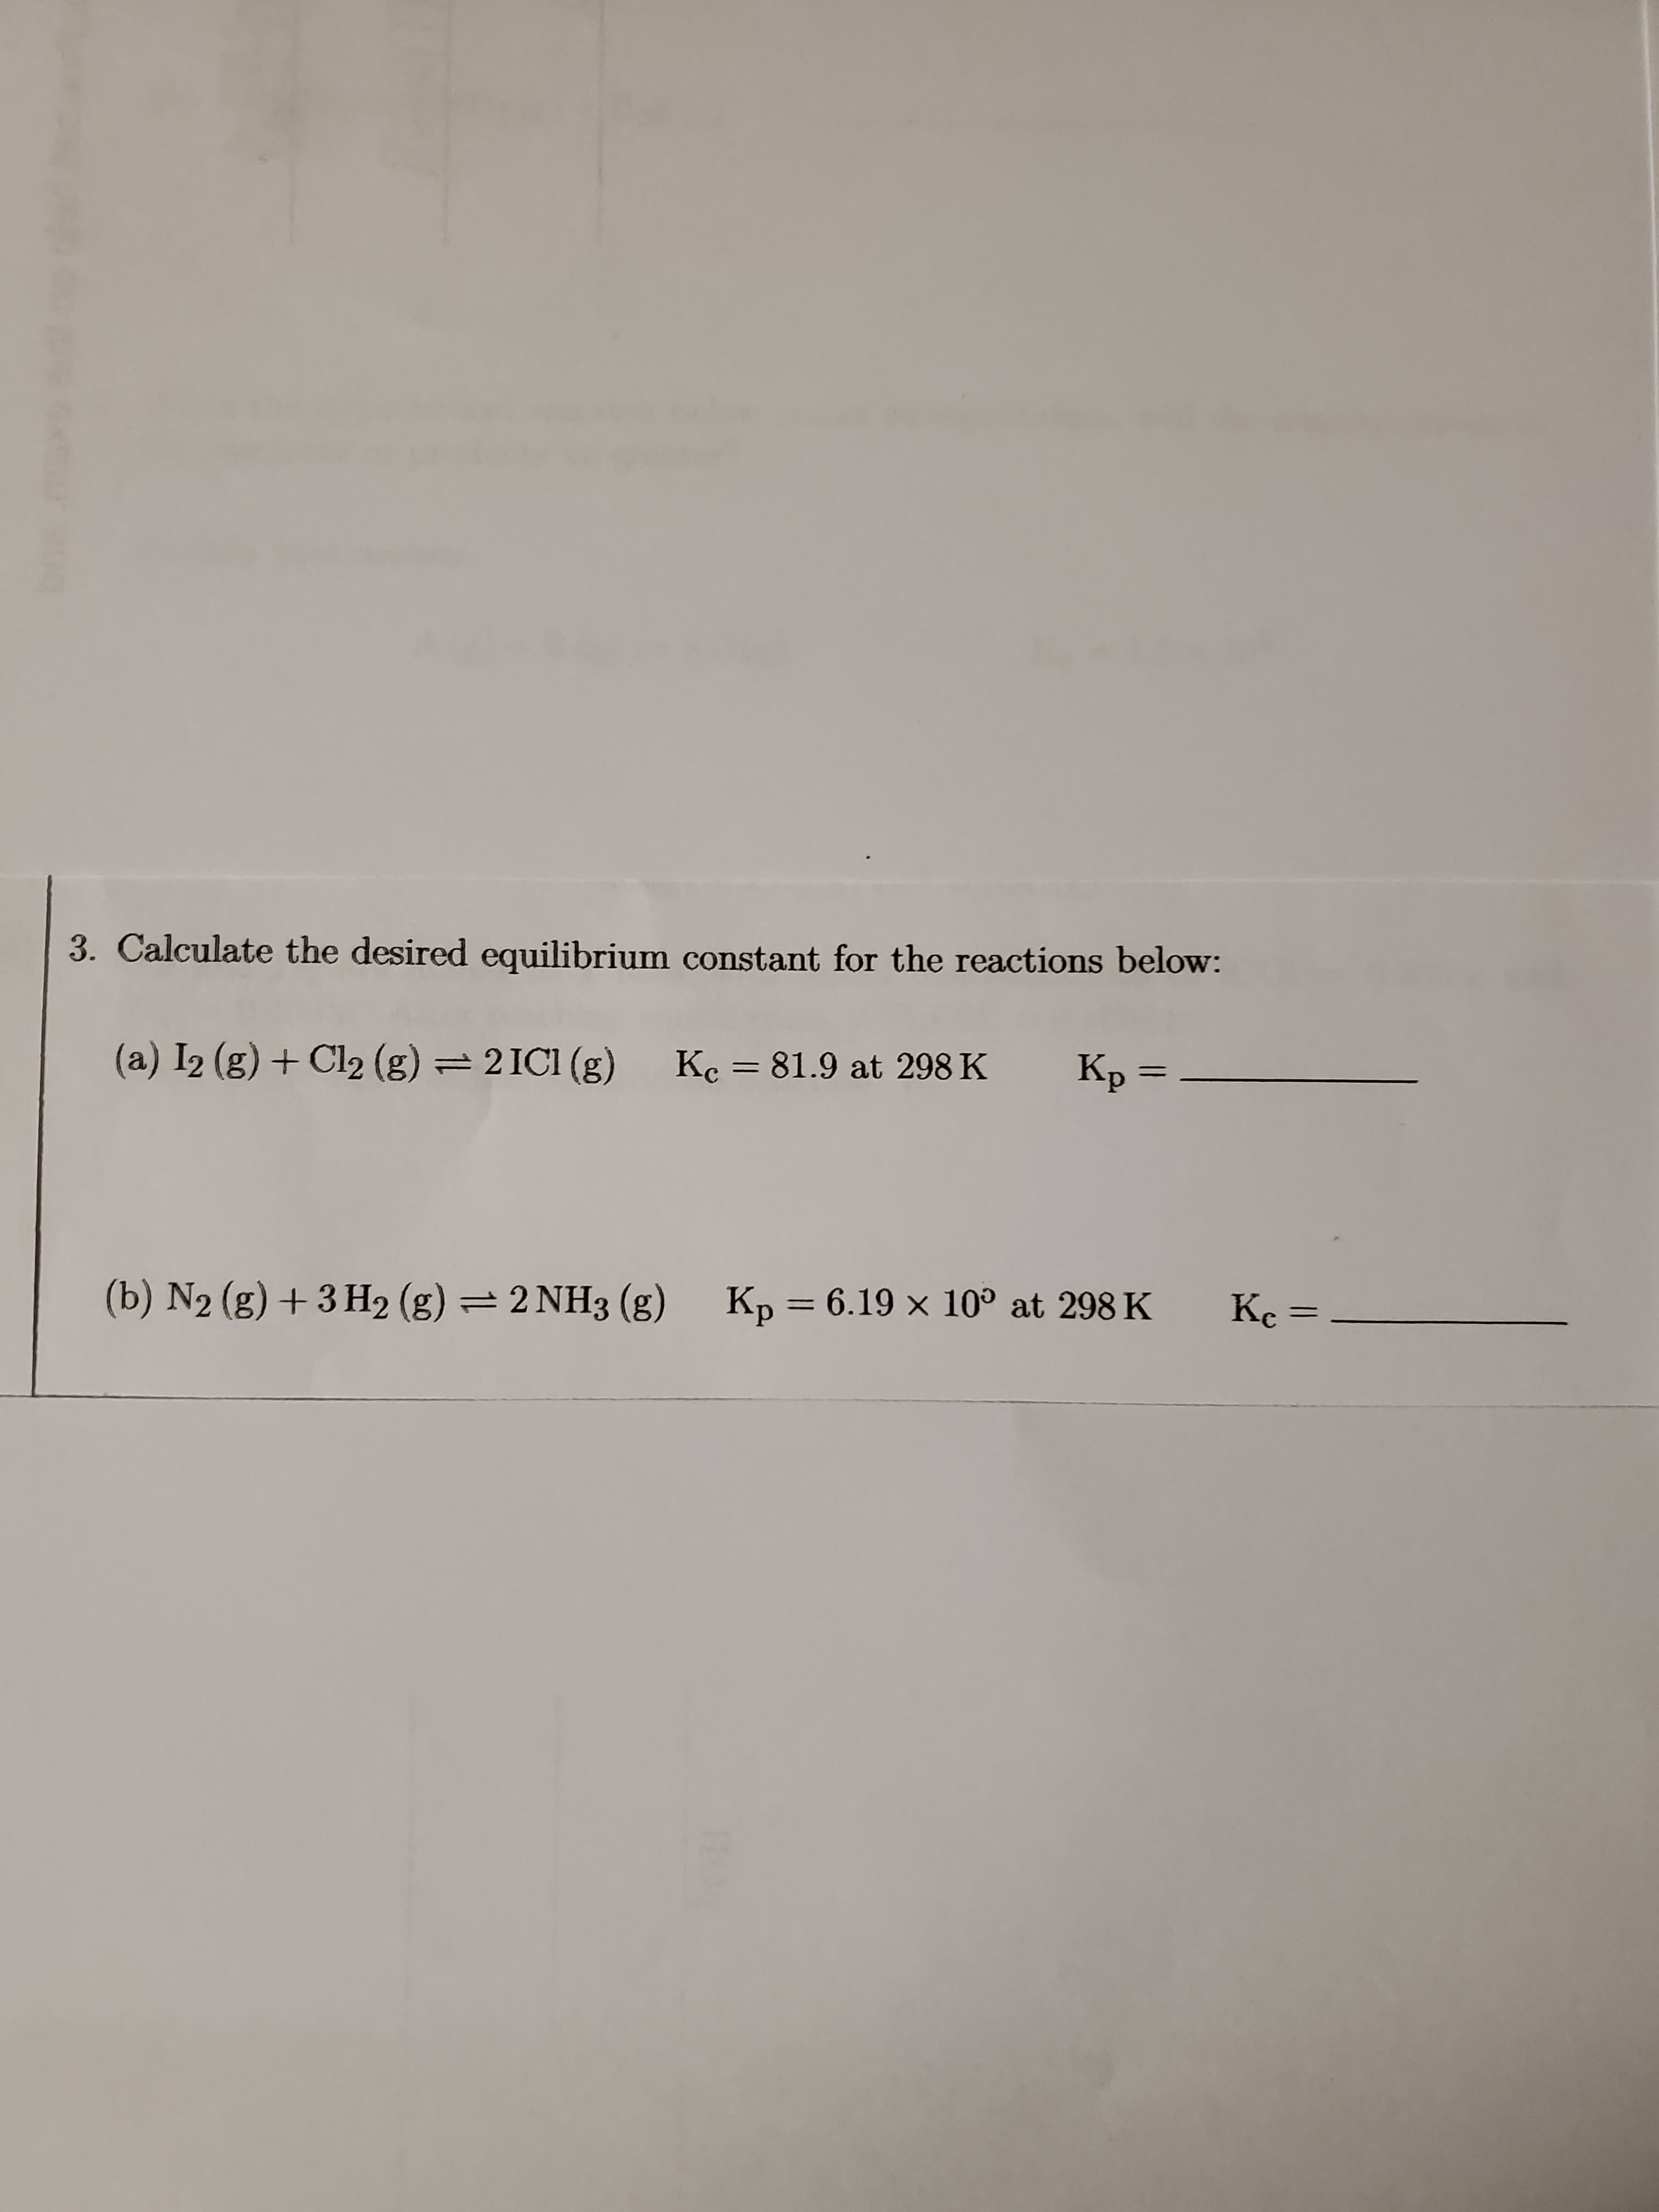 3. Calculate the desired equilibrium constant for the reactions below:
(a) I2 (g) + Cl2 (g) = 2ICI (g)
Kc = 81.9 at 298 K
Kp =
(b) N2 (g) + 3 H2 (g) = 2 NH3 (g) Kp = 6.19 × 10° at 298 K
Kc =
%3D
